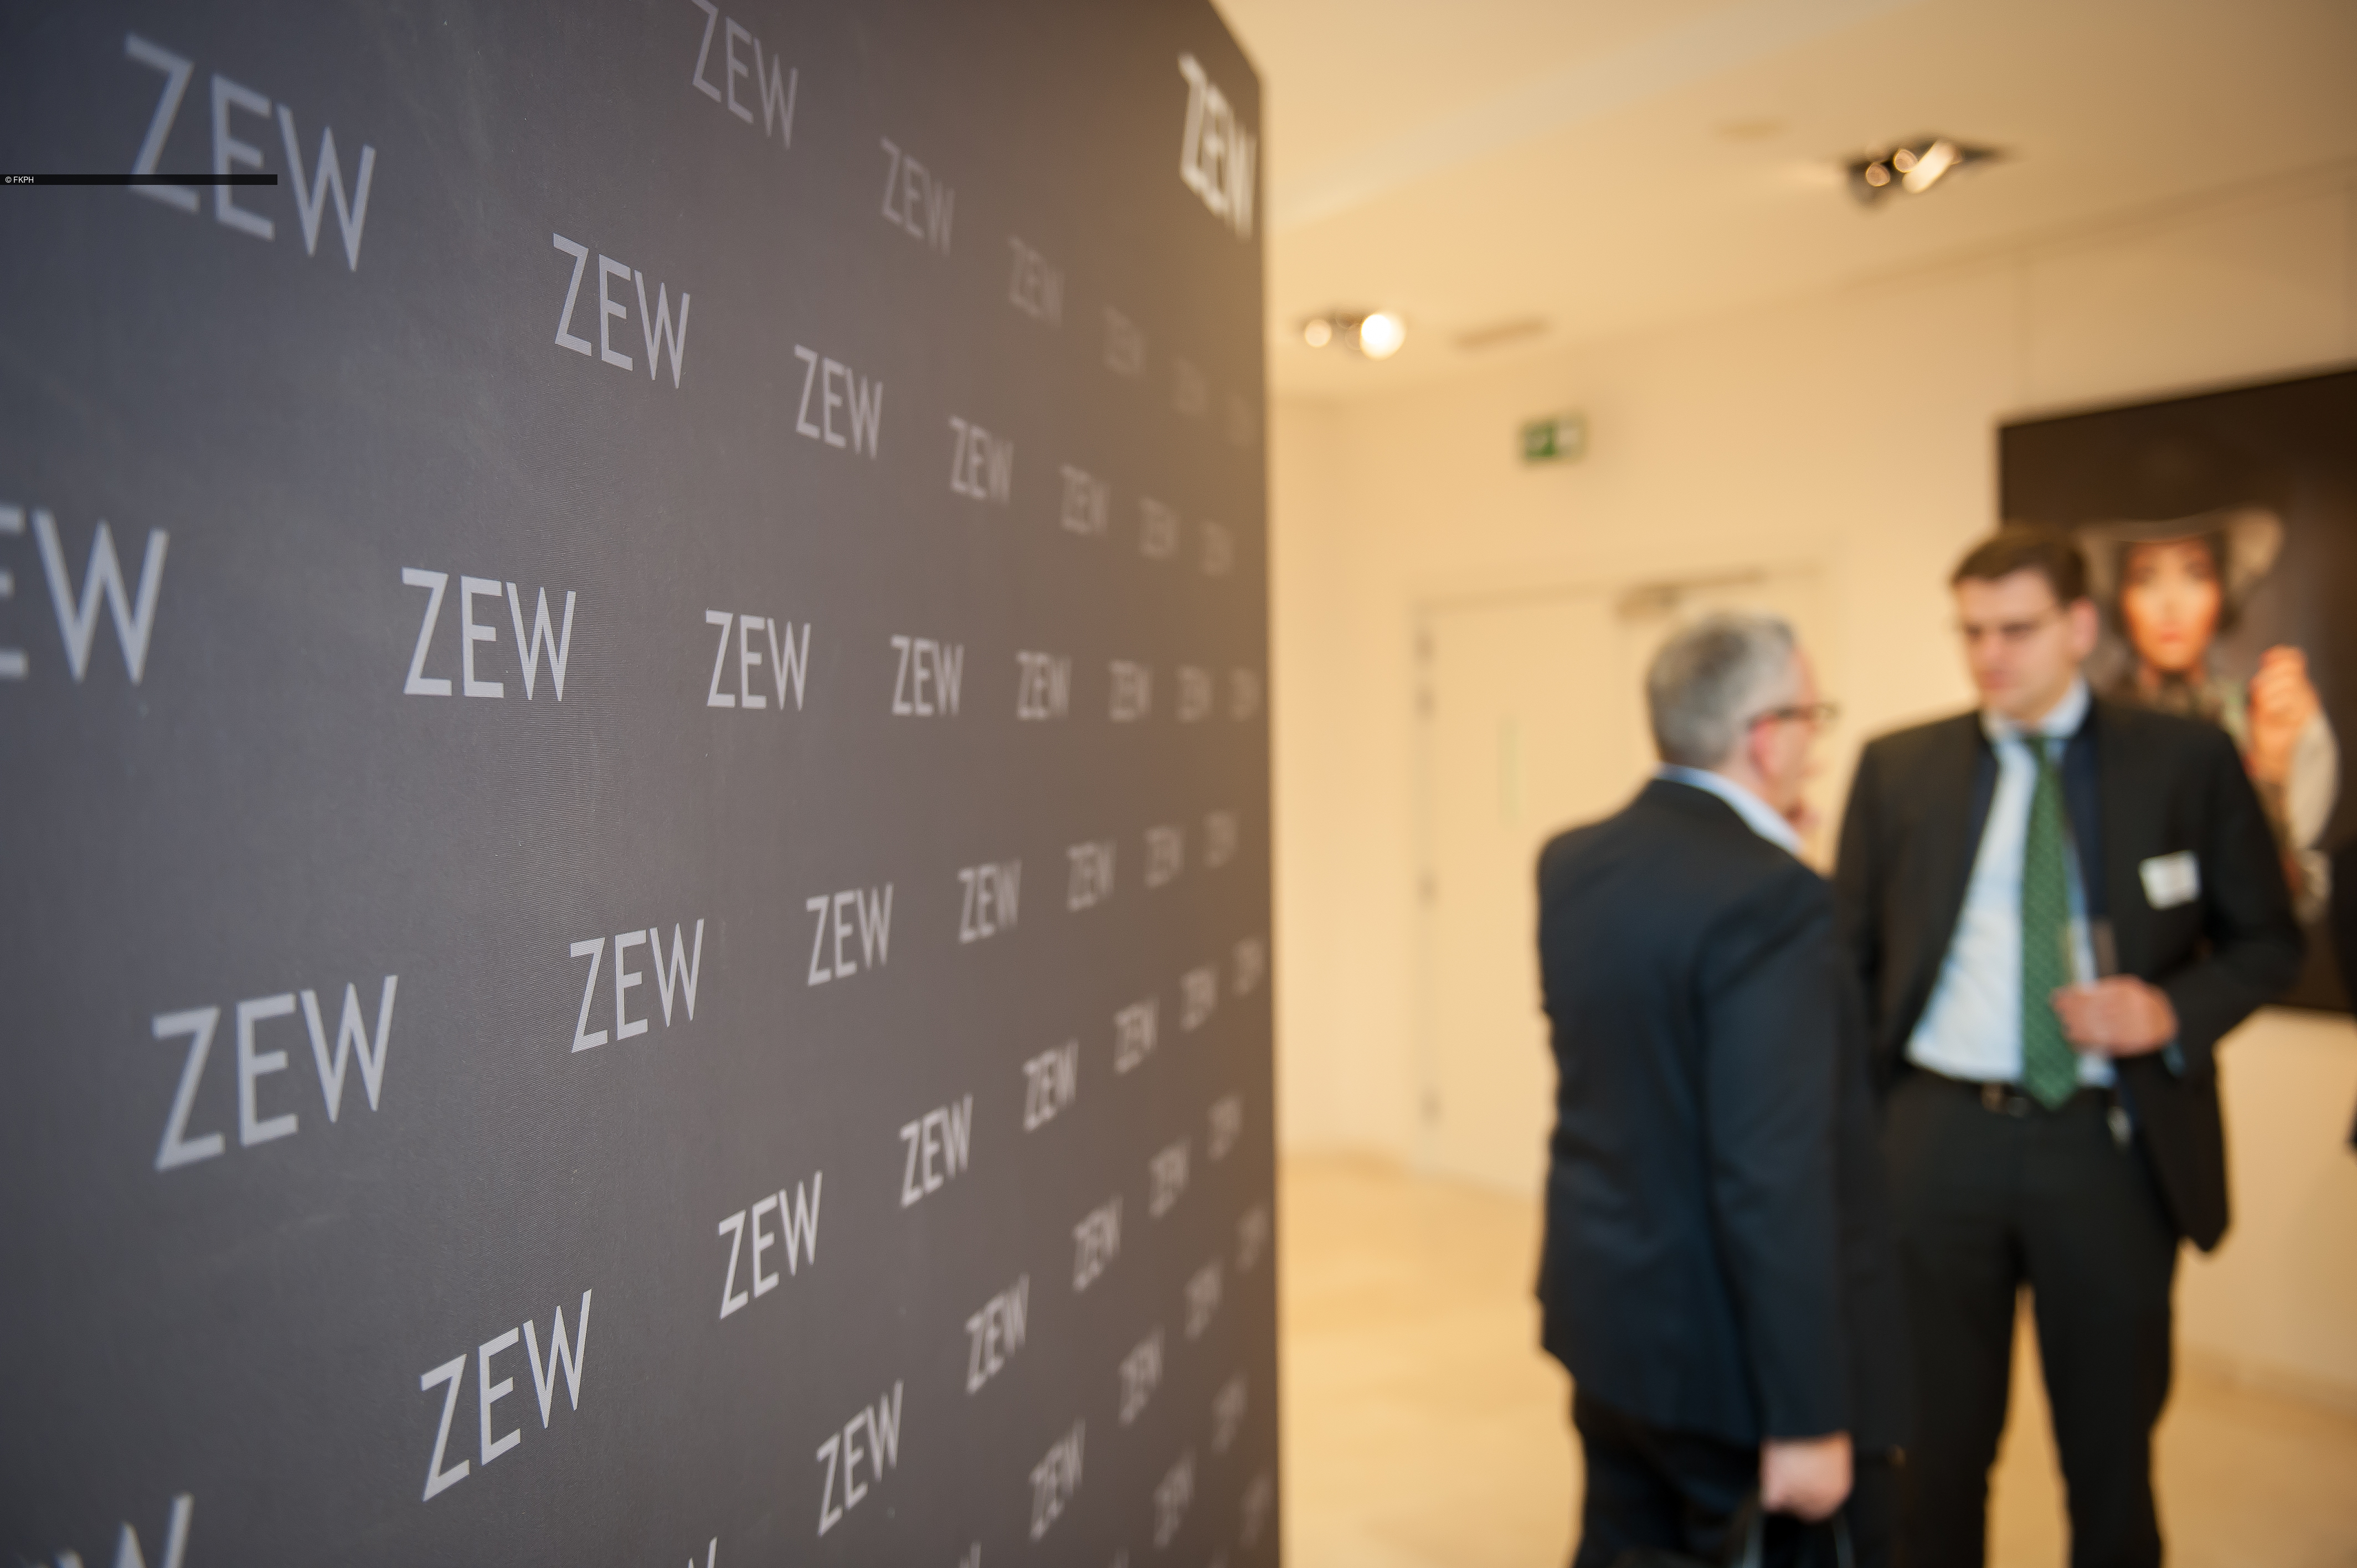 The ZEW Lunch Debate in Brussels discussed the topic of digitisation in the workplace